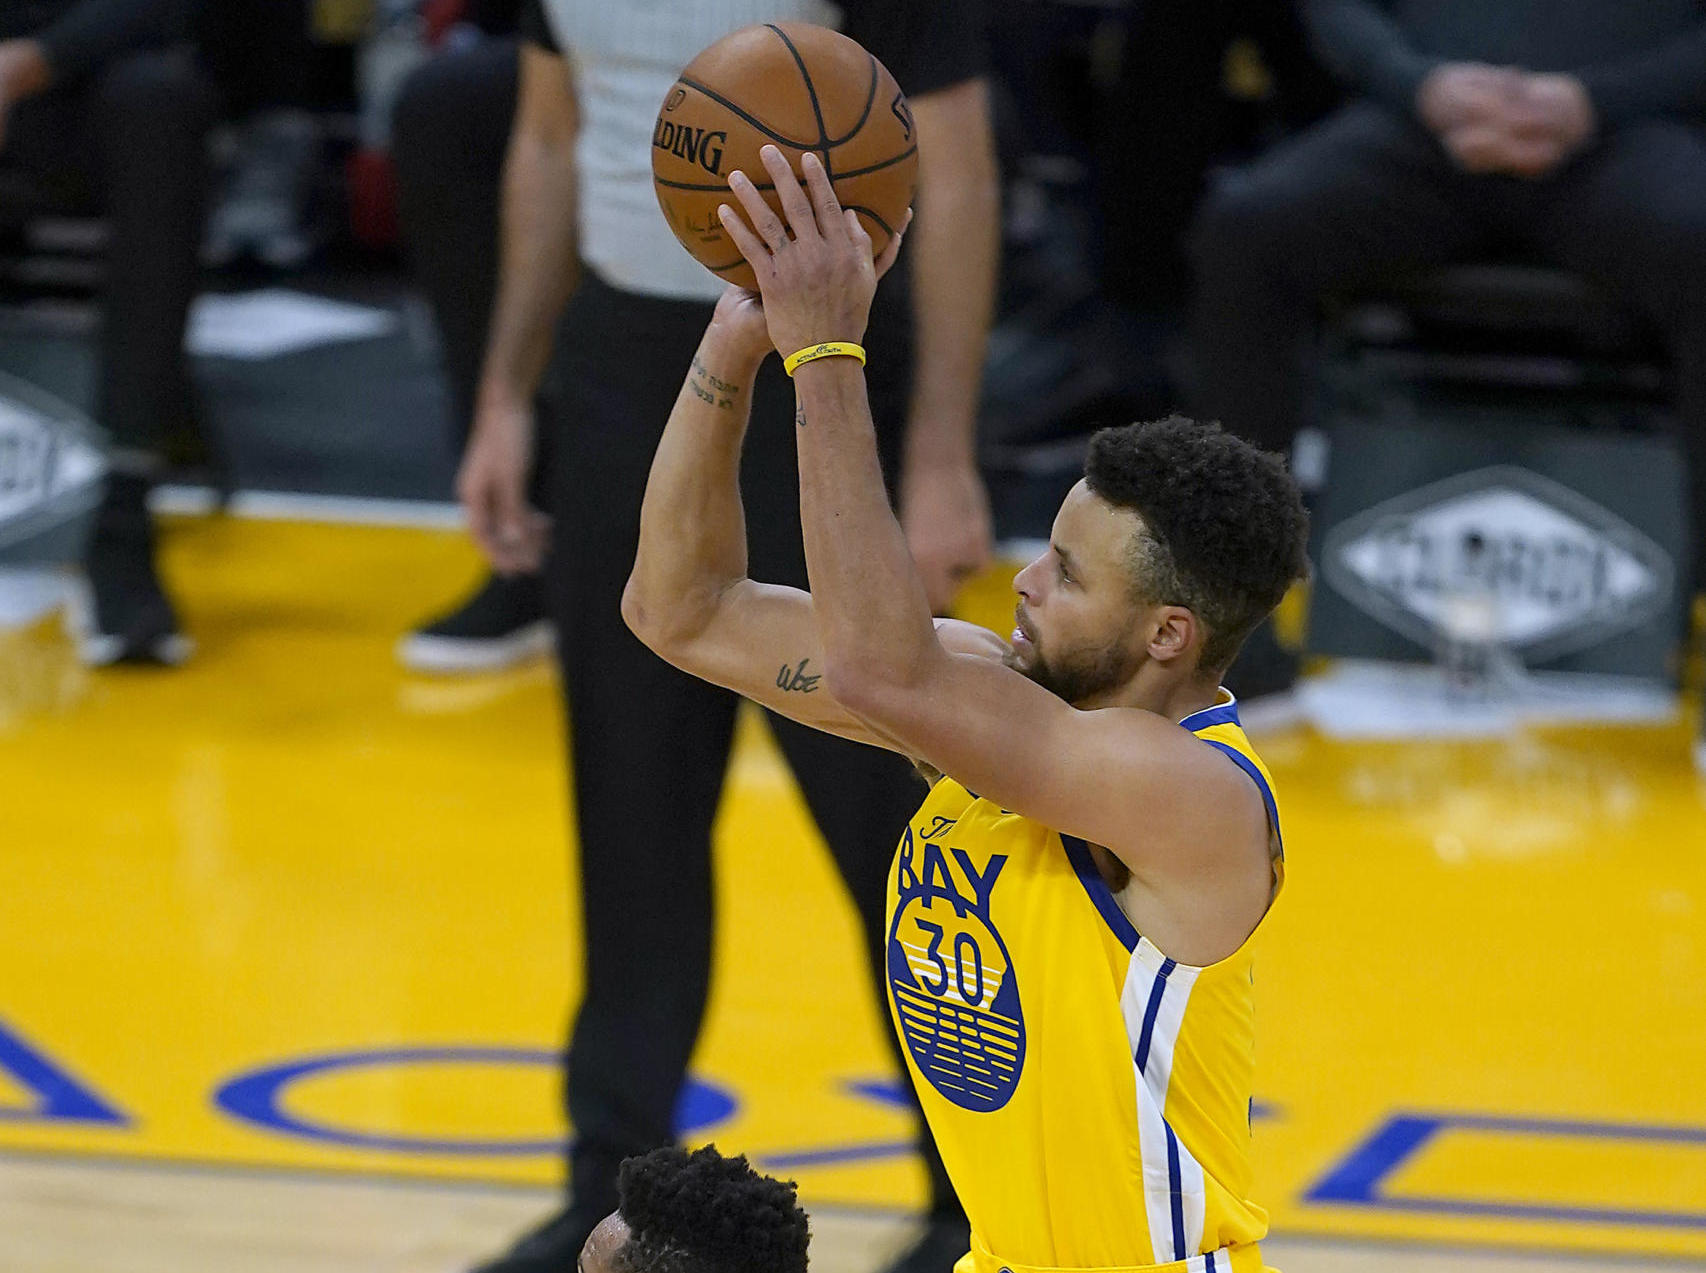 SAN FRANCISCO (AP) - Stephen Curry let it fly from way out under pressure w...